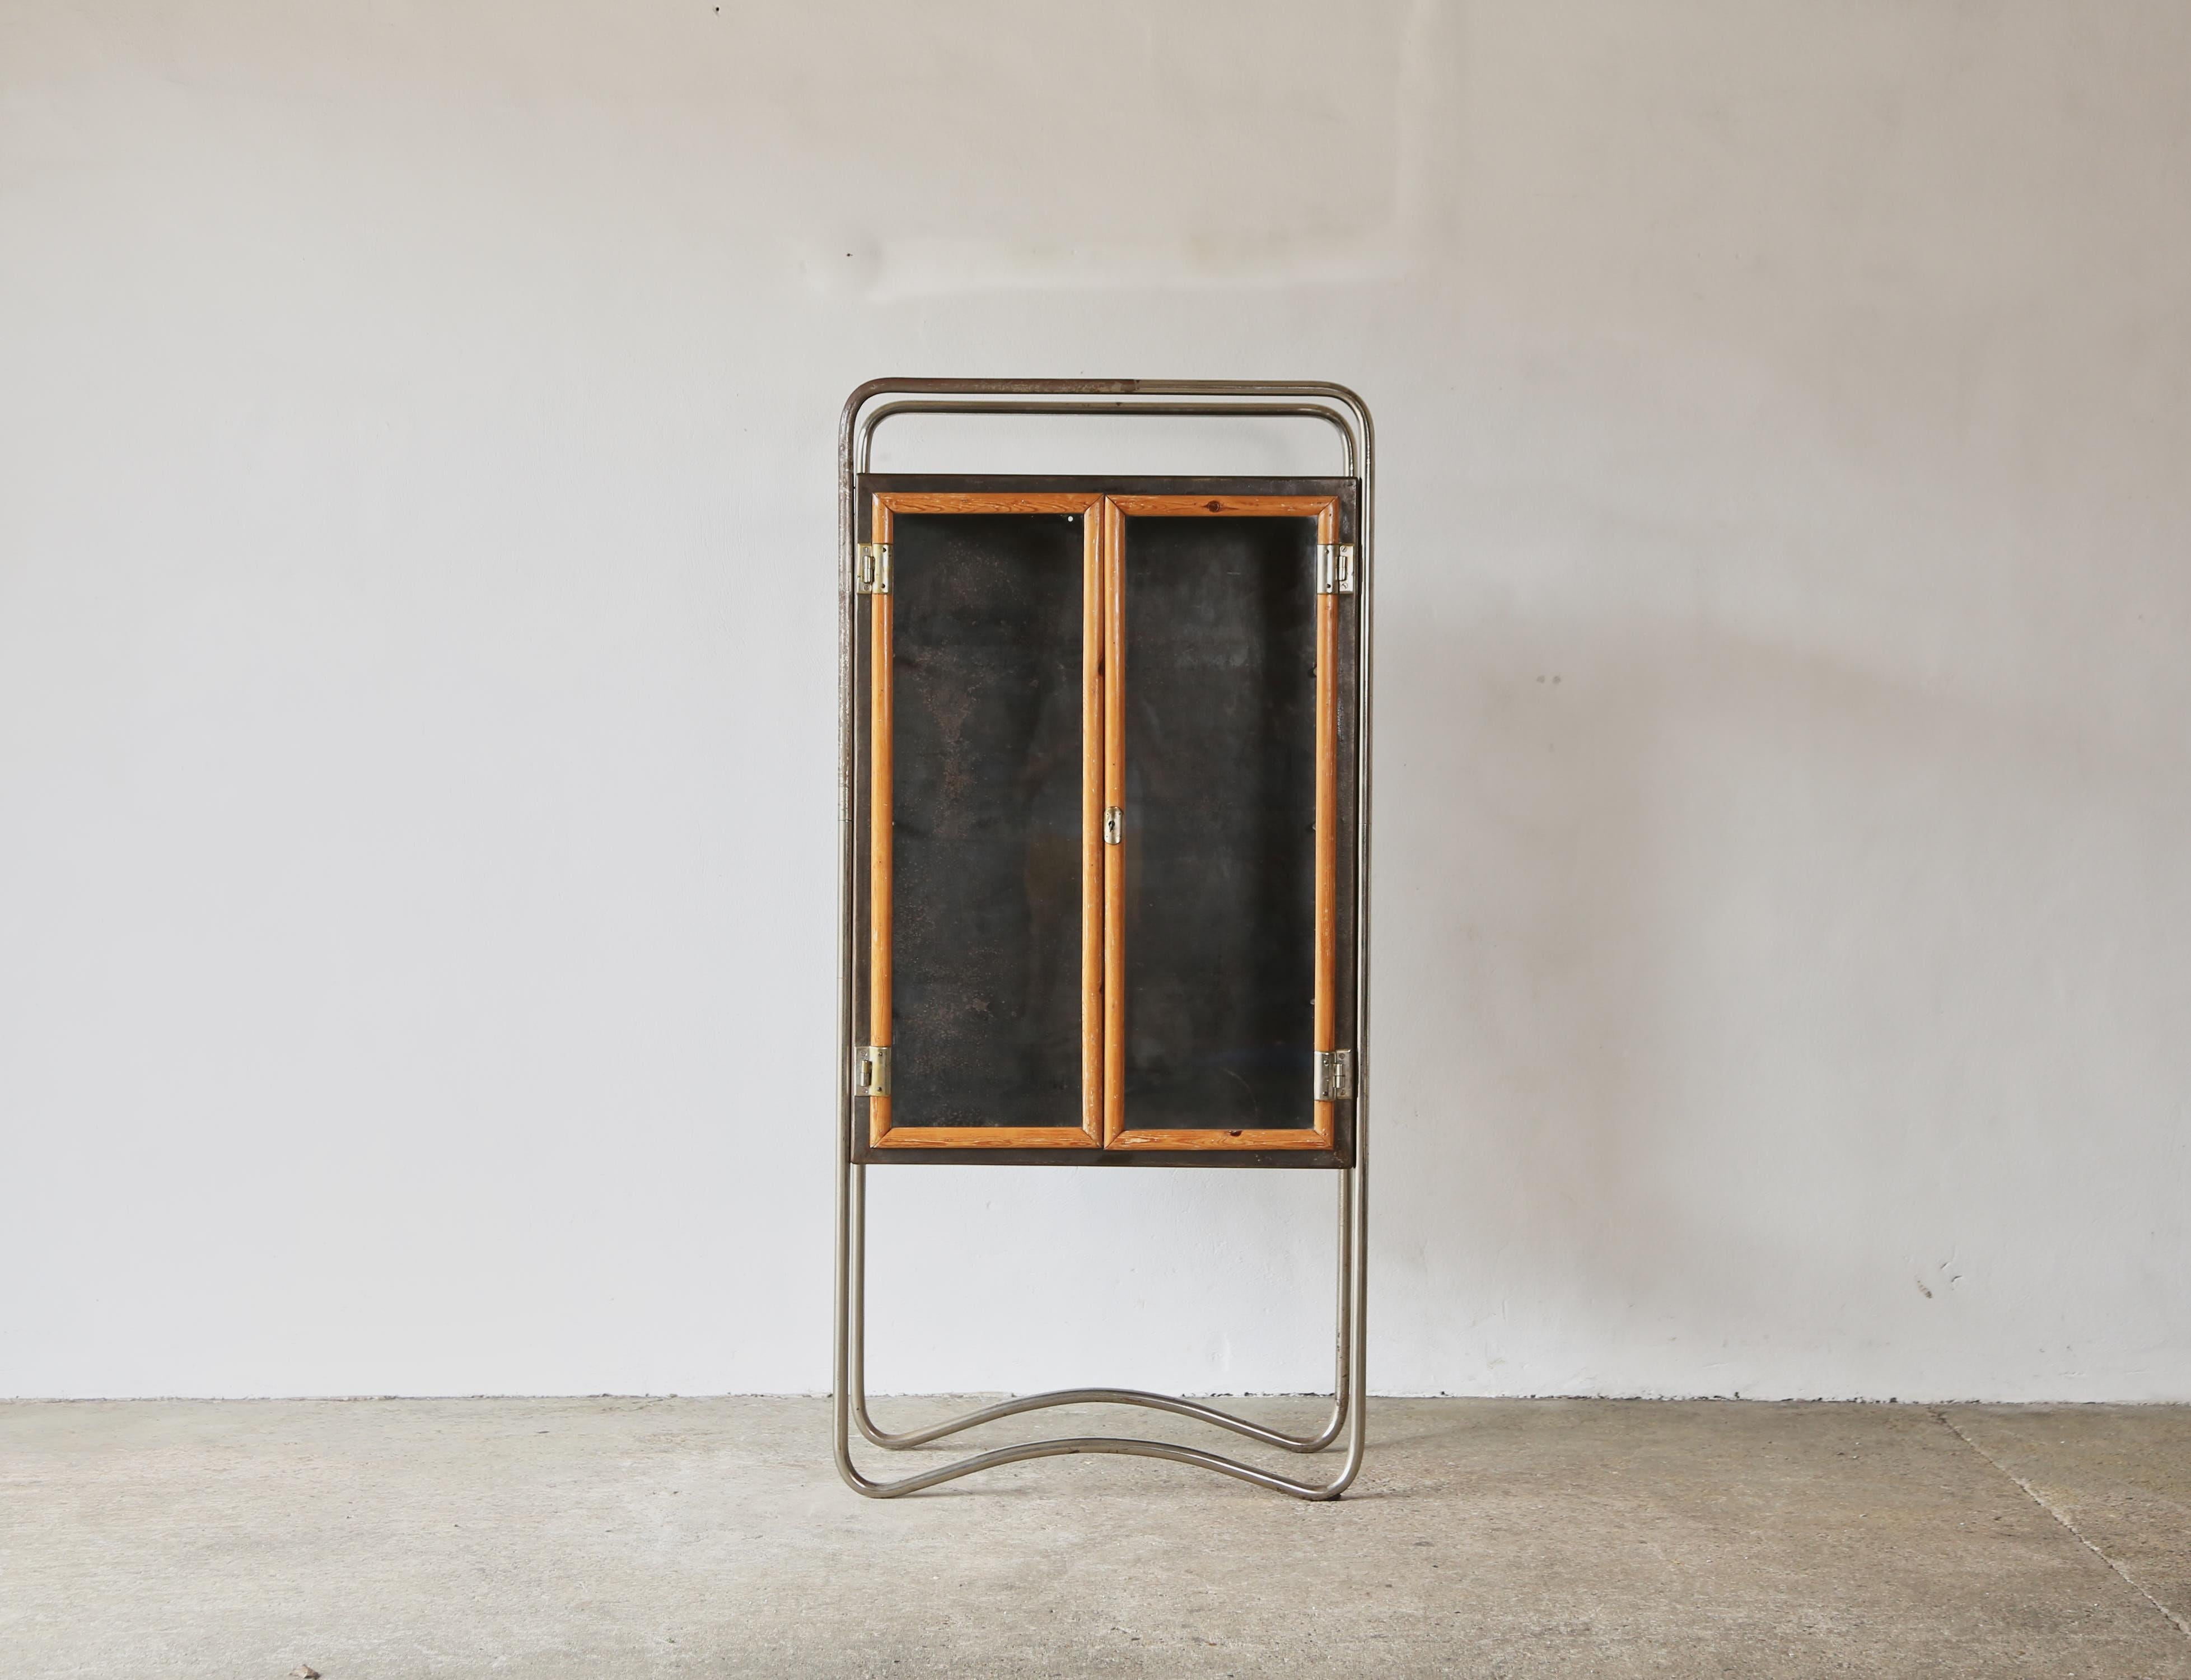 Tubular steel, wood and glass cabinet, 1940s.   Original key present.   The removable glass side panels and glass shelves have been replaced.  Some wear to tubular steel frame (as photographed).   Fast shipping worldwide.




